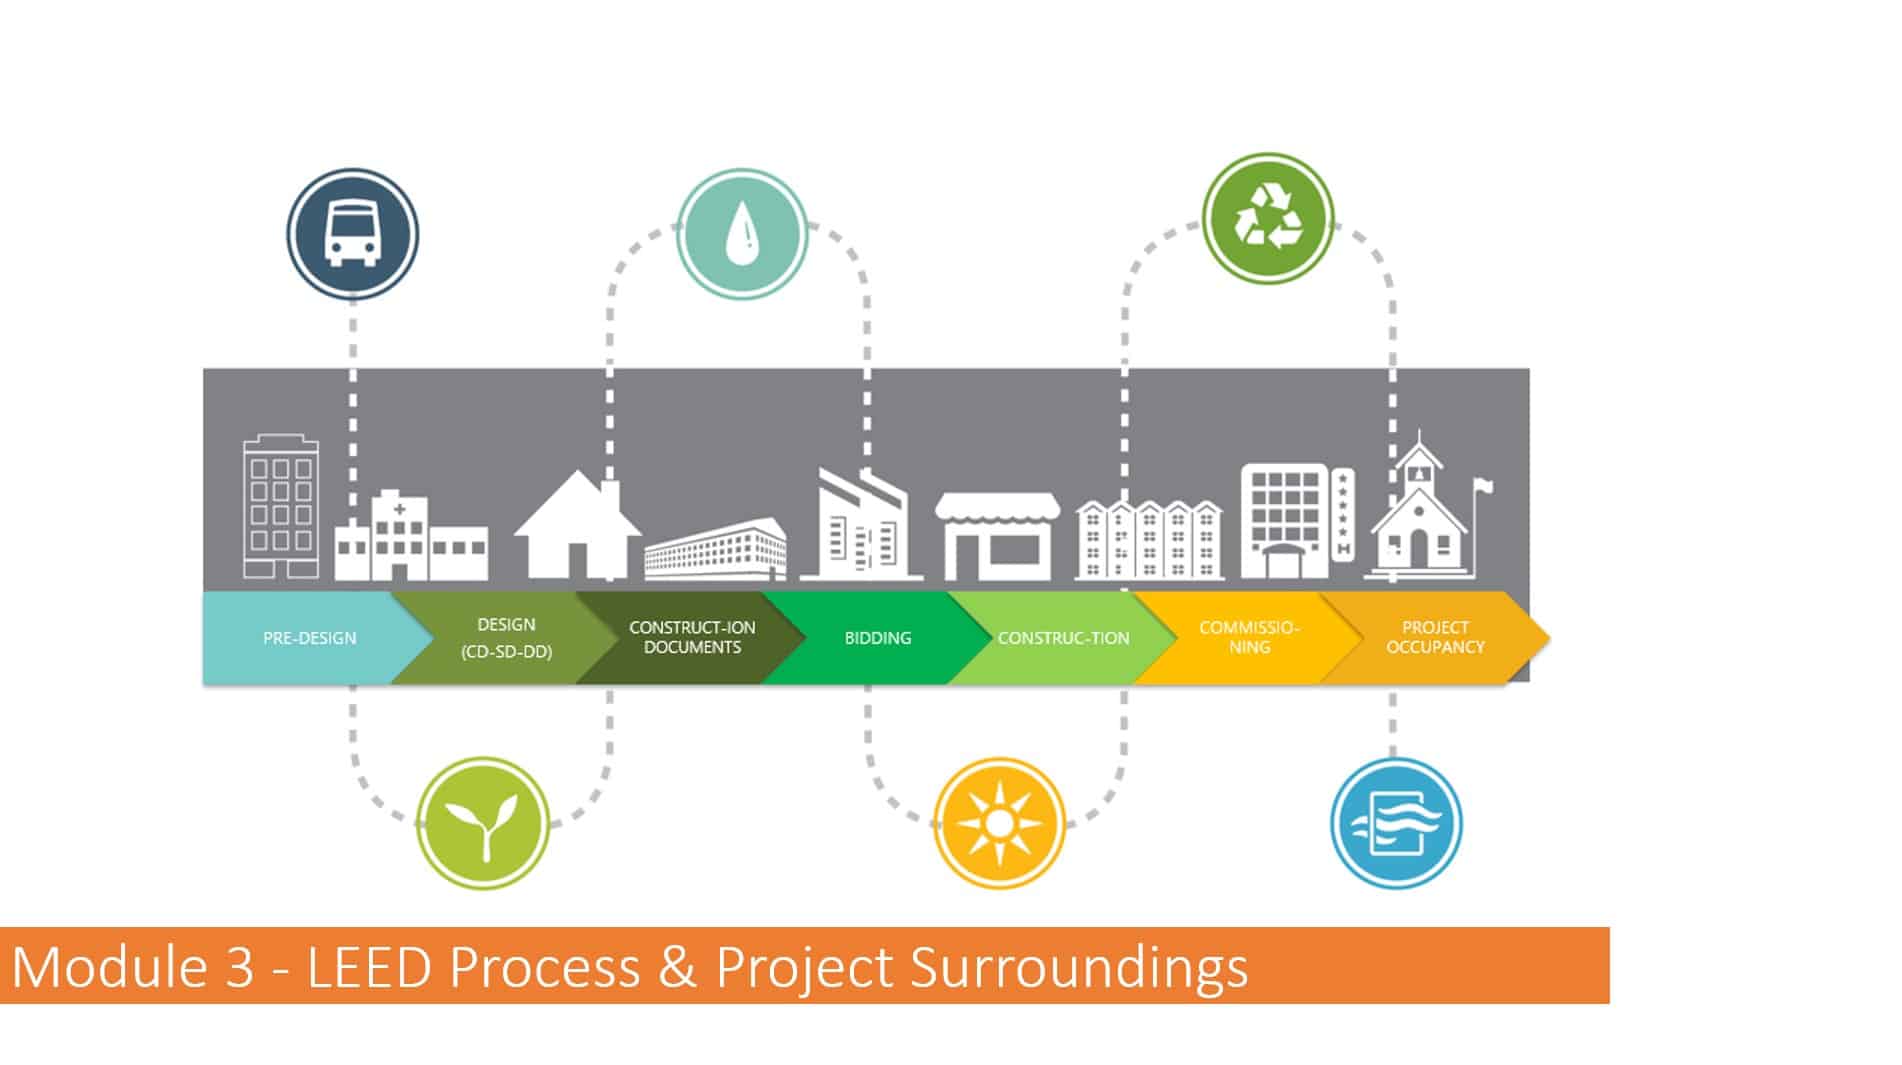 Module 3- LEED Process and Surroundings - GBRIONLINE